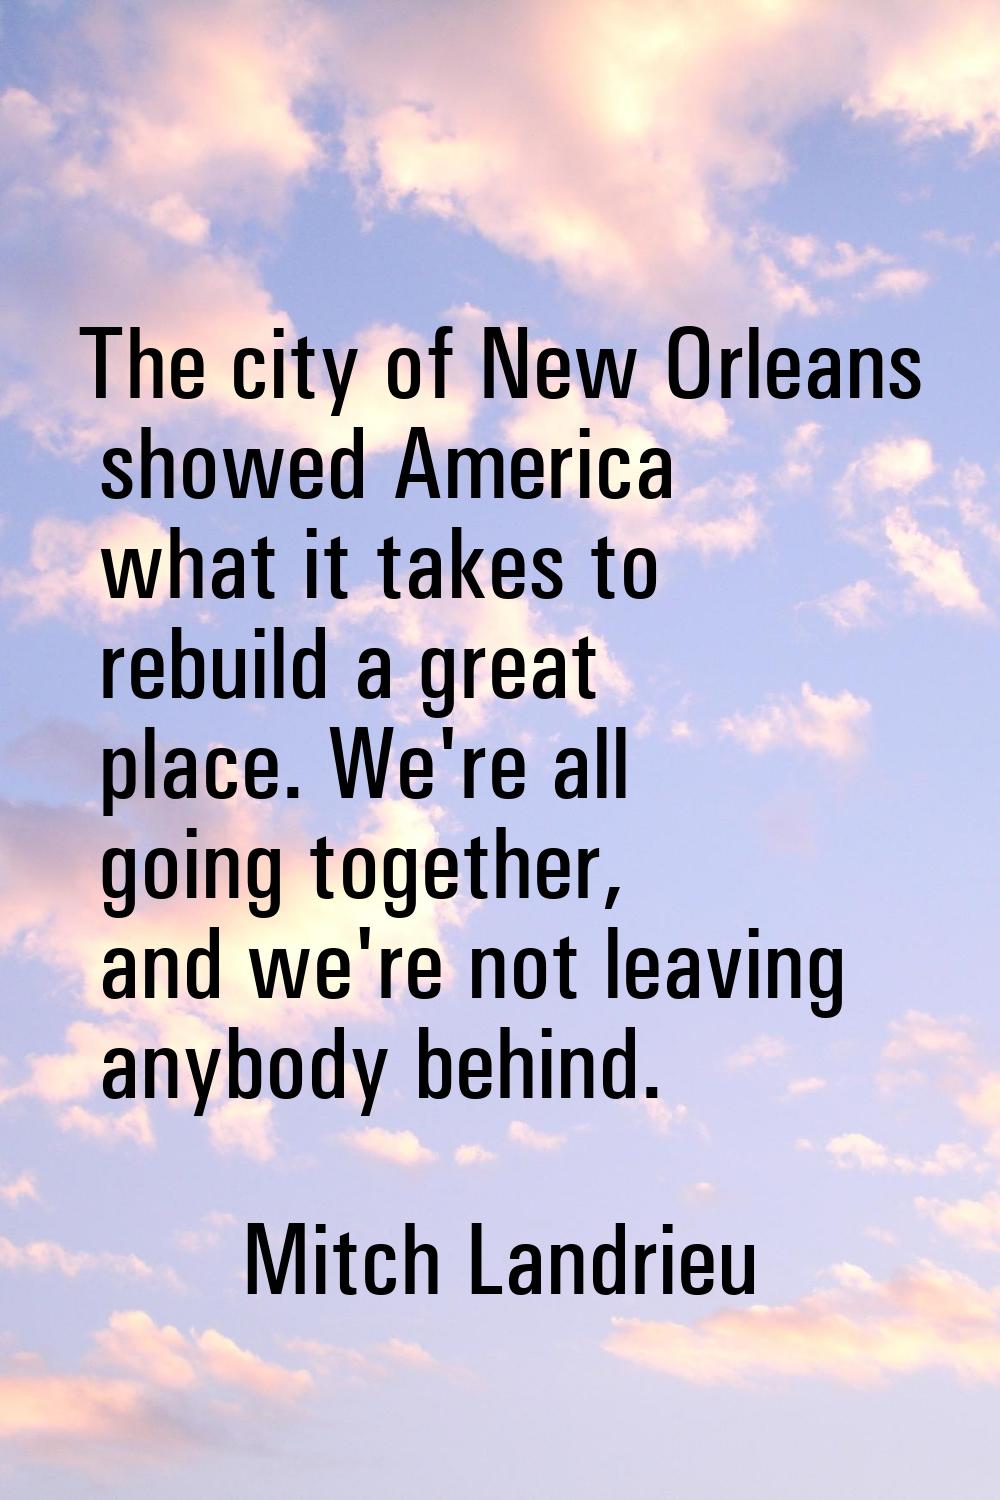 The city of New Orleans showed America what it takes to rebuild a great place. We're all going toge